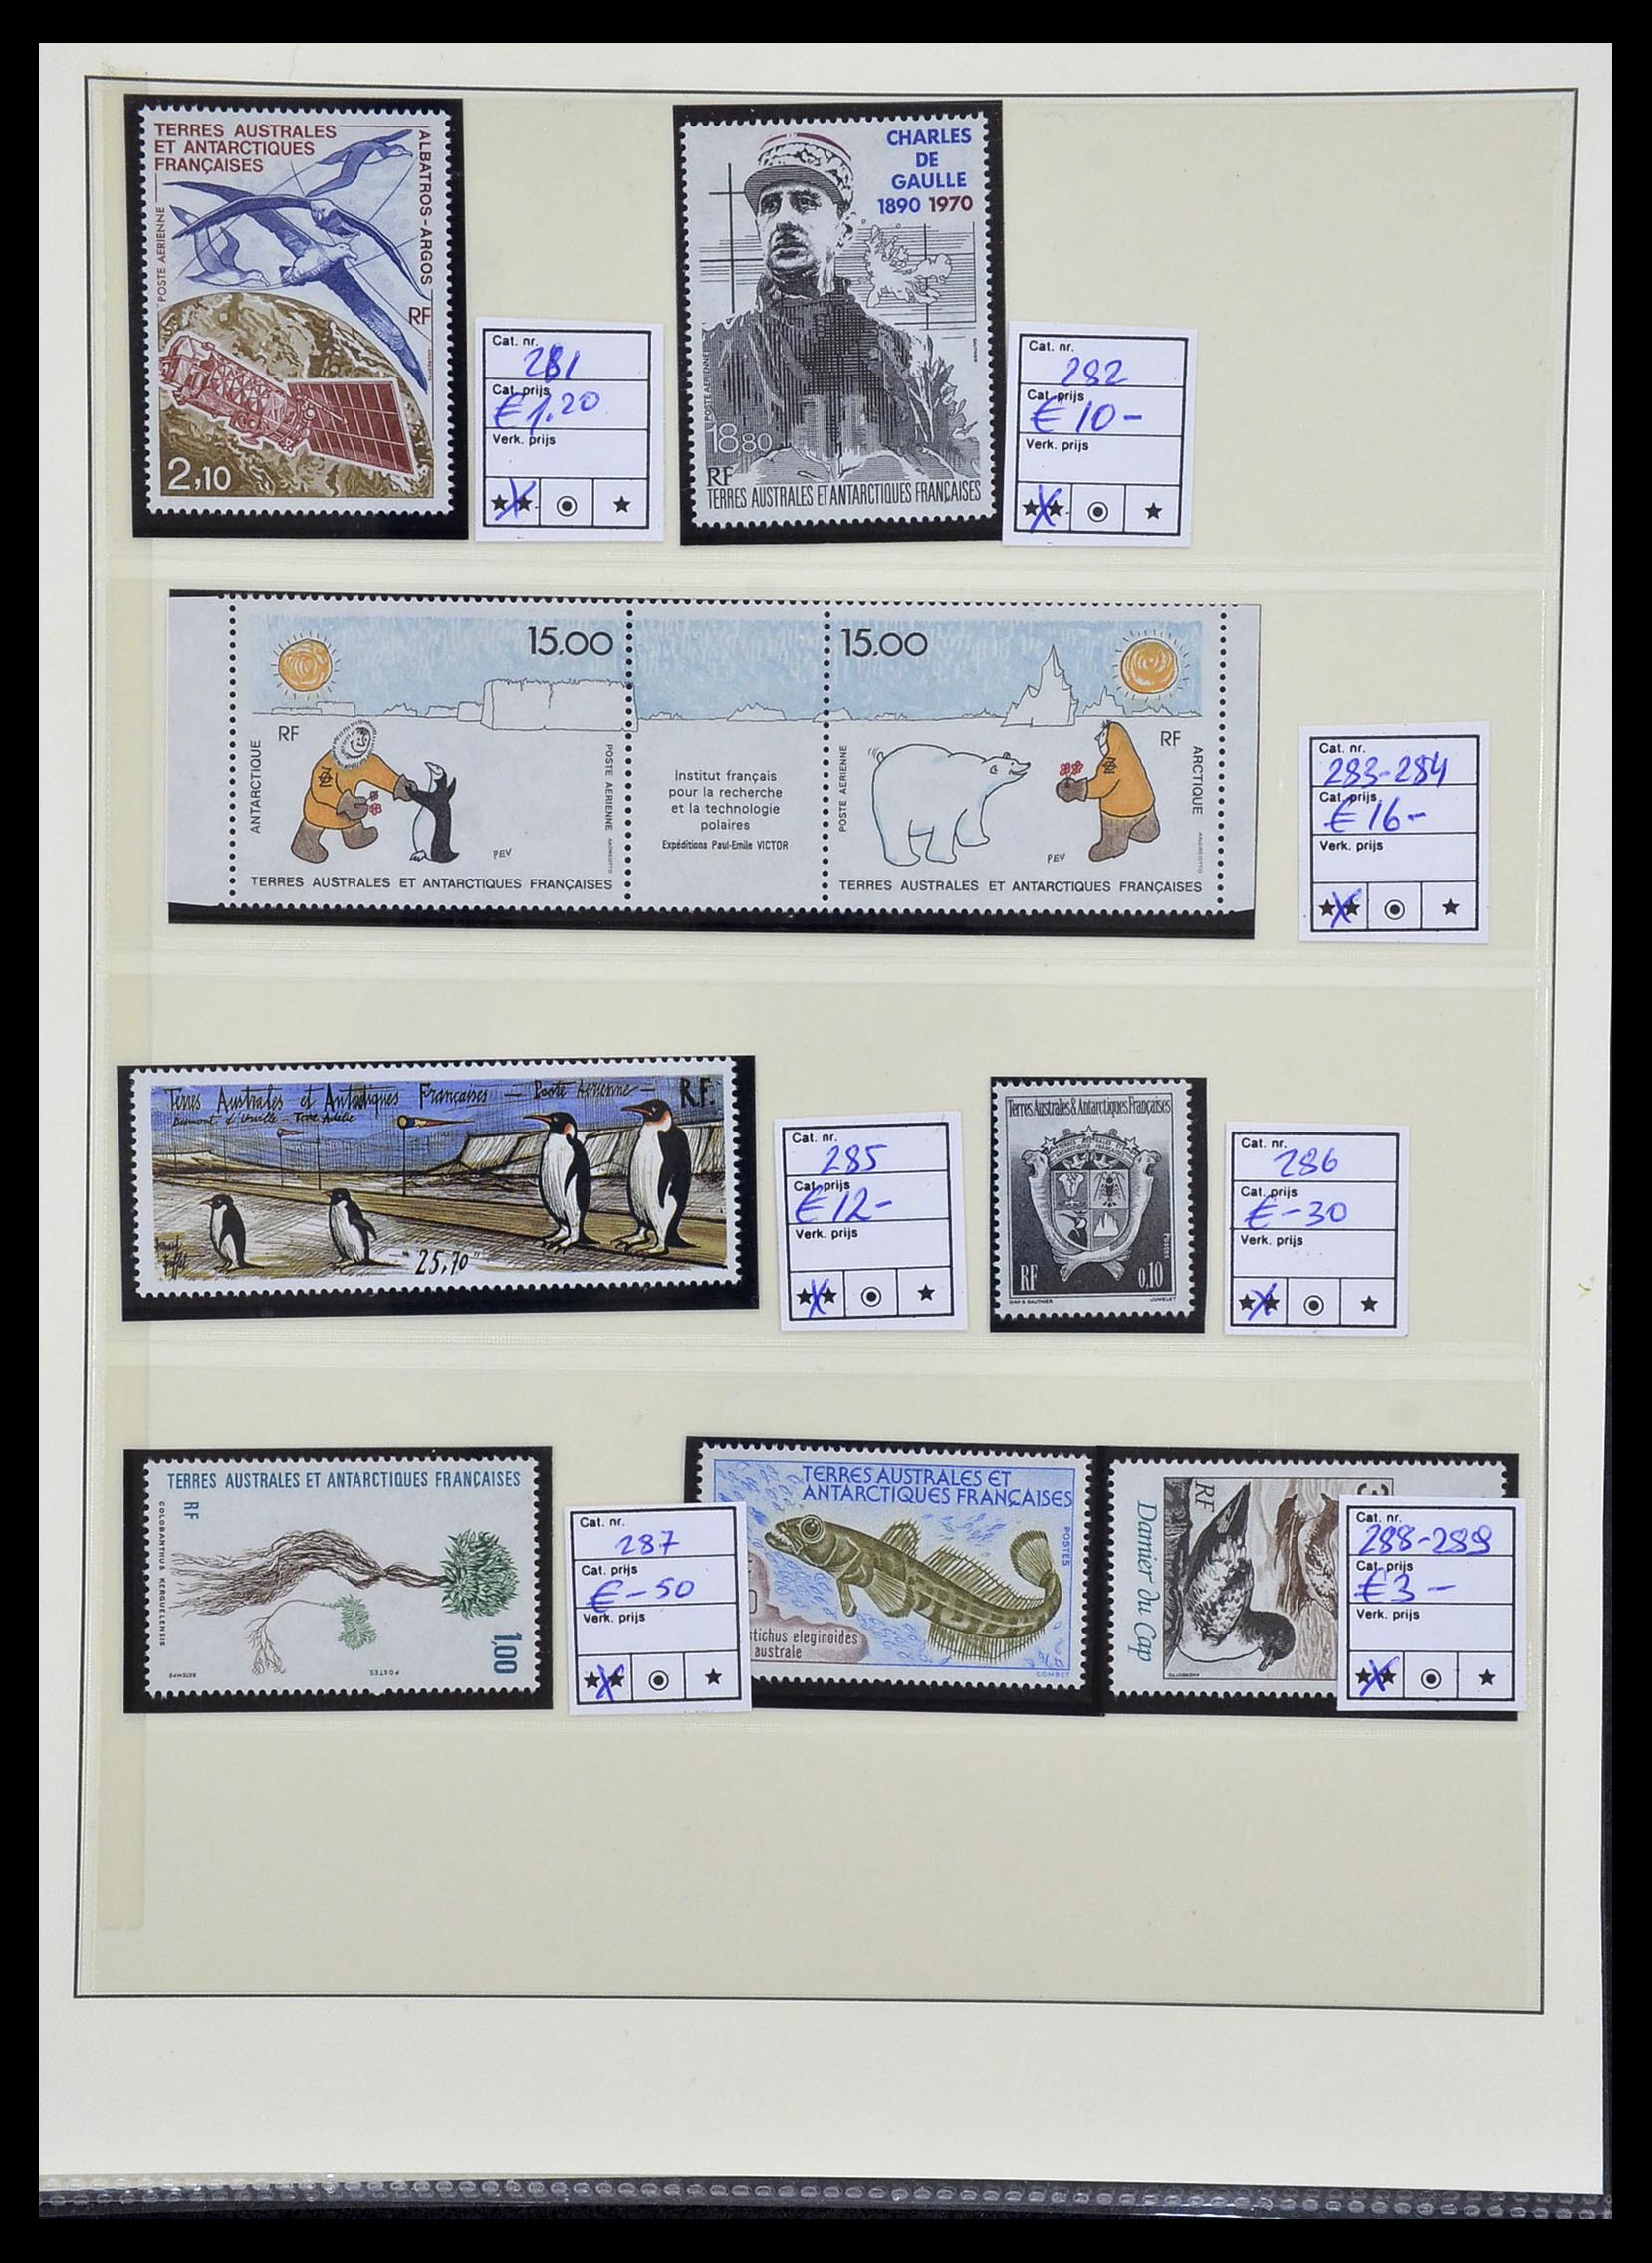 34035 023 - Stamp collection 34035 French Antarctics 1955-1992.